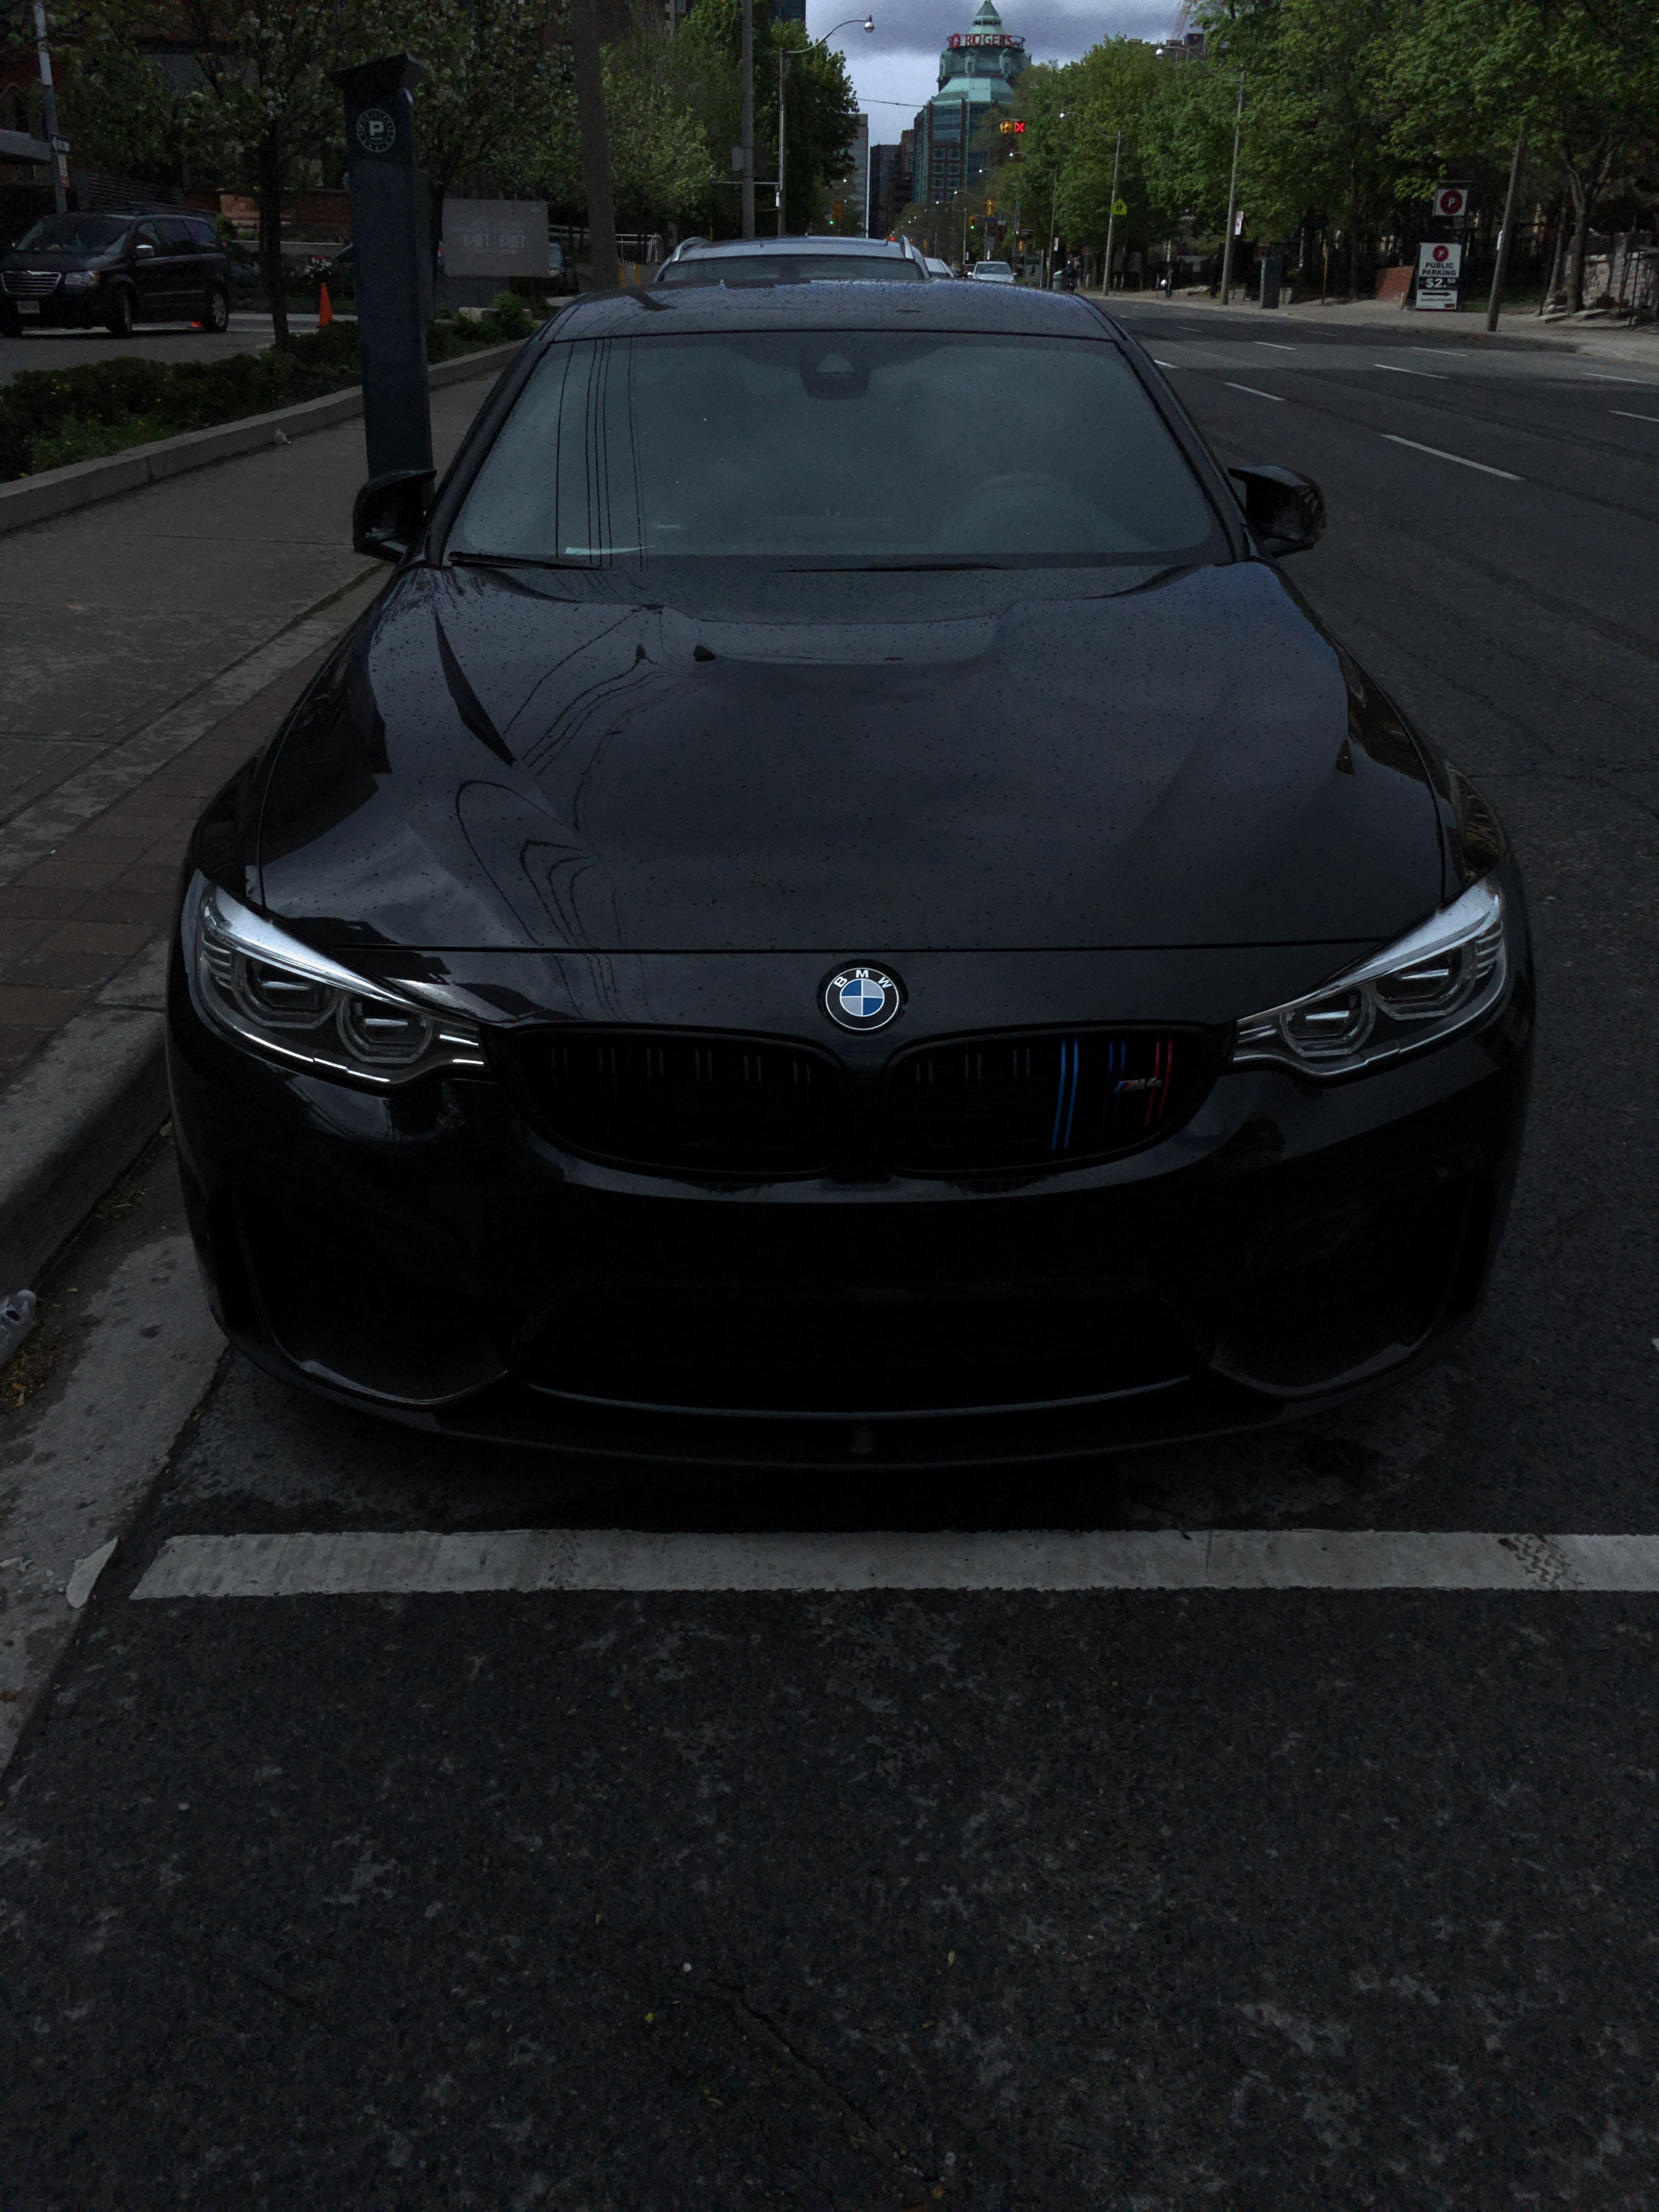 Jag.gr 645 PRO Mk III for Apple iPhone 6s Plus sample photo. Bmw m4 photography